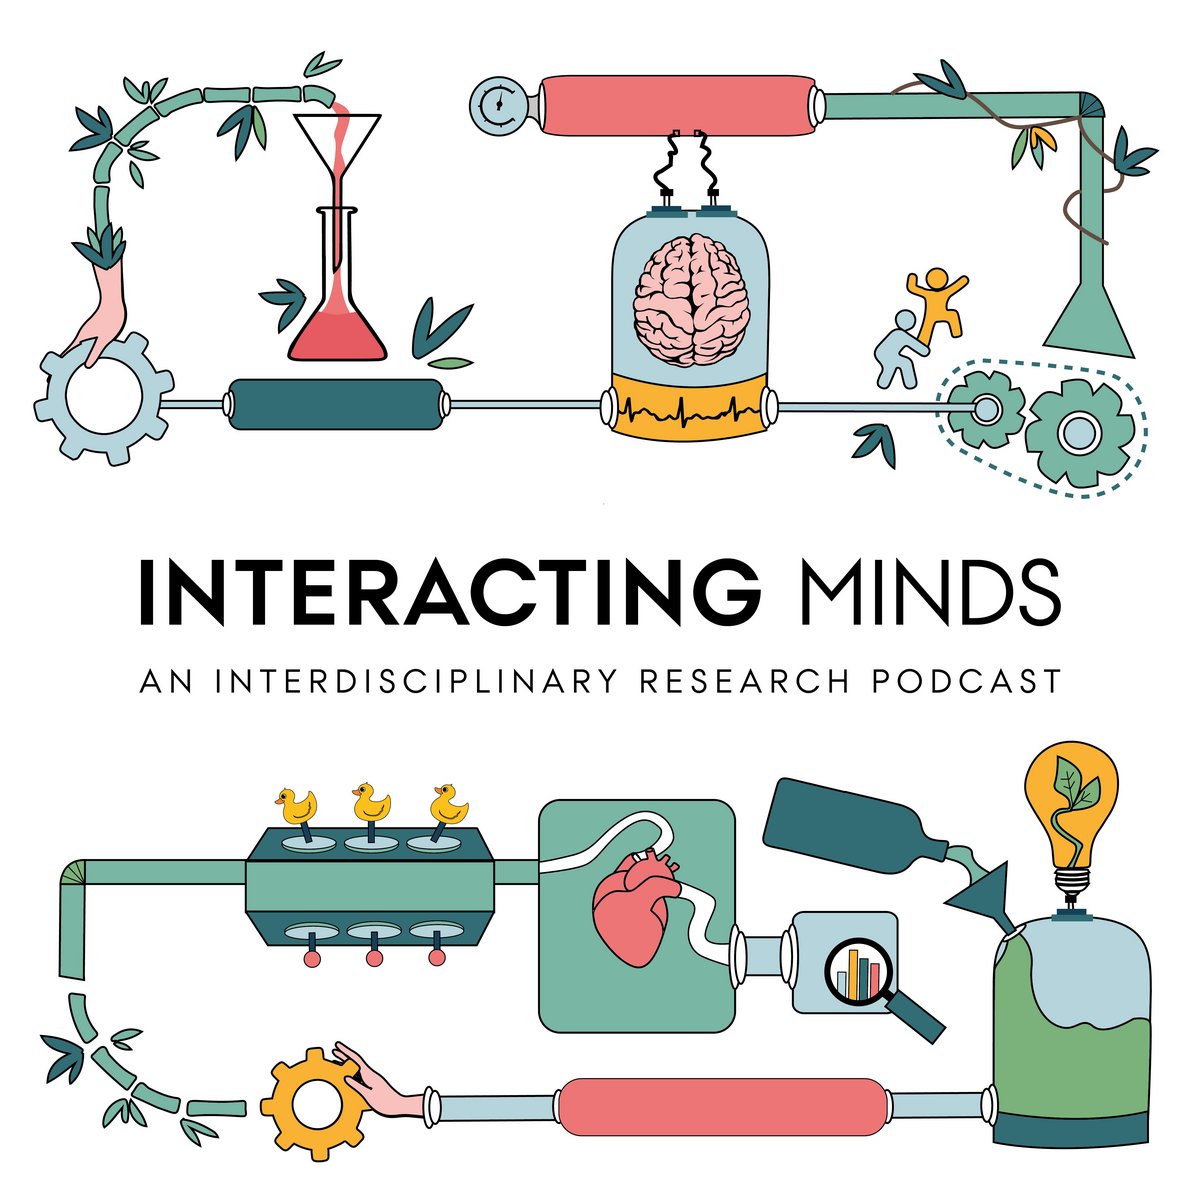 Image of Interacting Minds Podcast representation of core values.